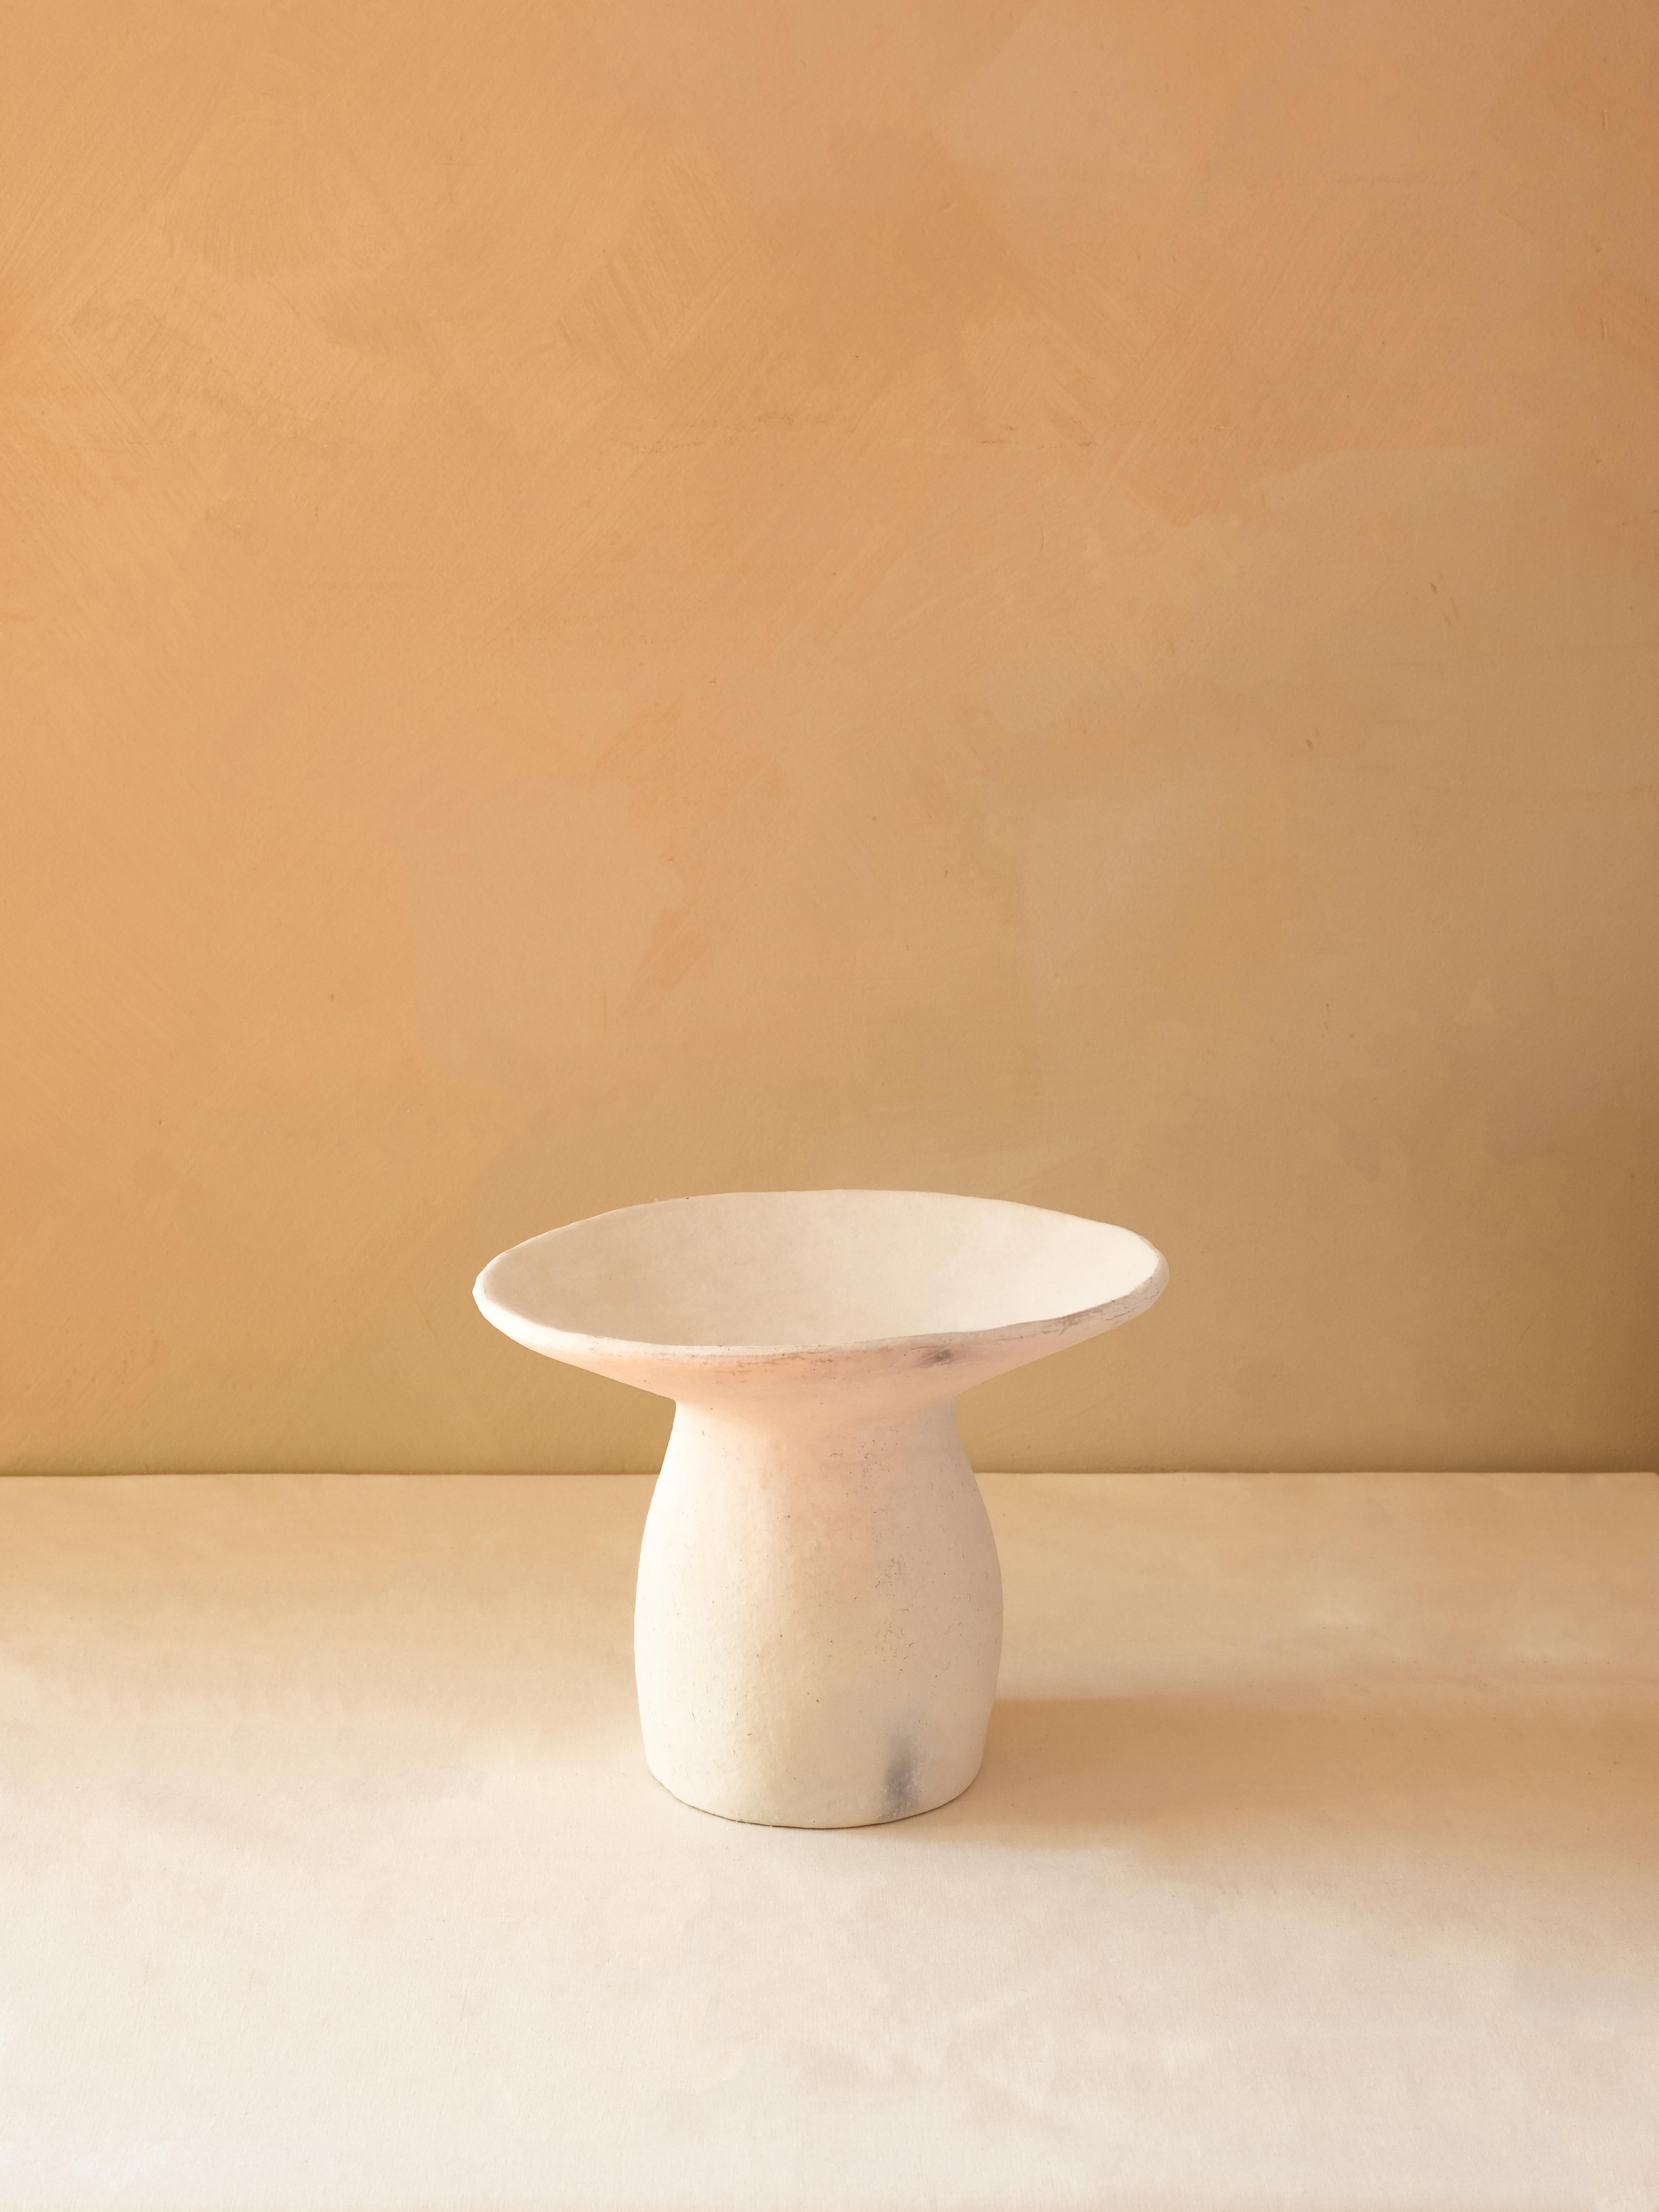 White Side Tables Made of local Clay, natural pigments, Handcrafted 11